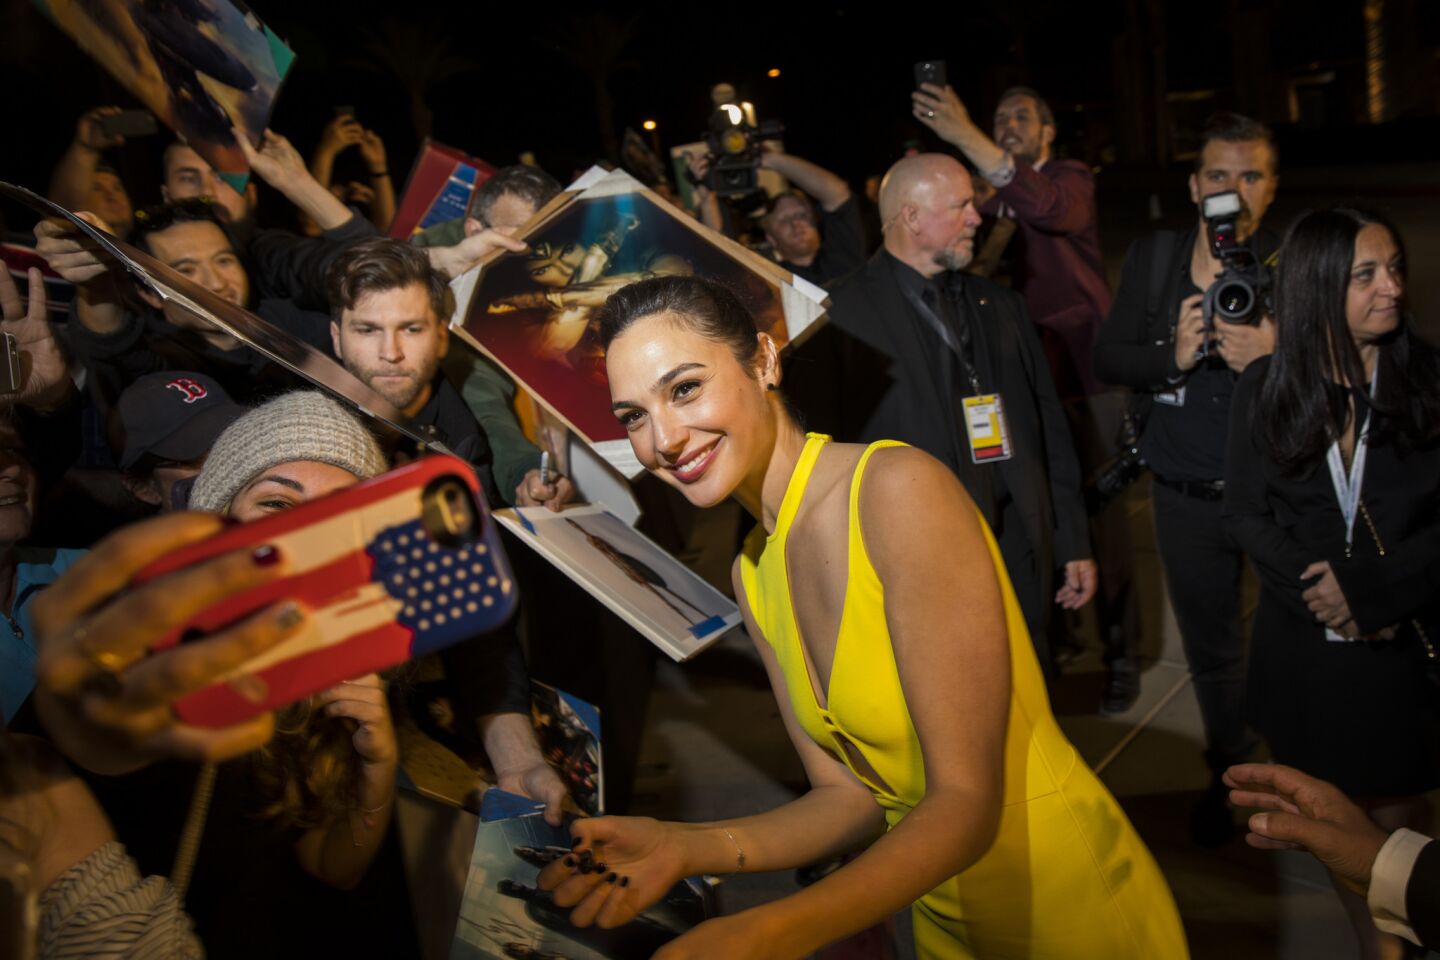 "Wonder Woman's" Gal Gadot signs autographs and takes pictures with fans before stepping on the red carpet at the 18th annual Palm Springs International Film Festival Gala on Tuesday. Gadot received the female Rising Star Award.